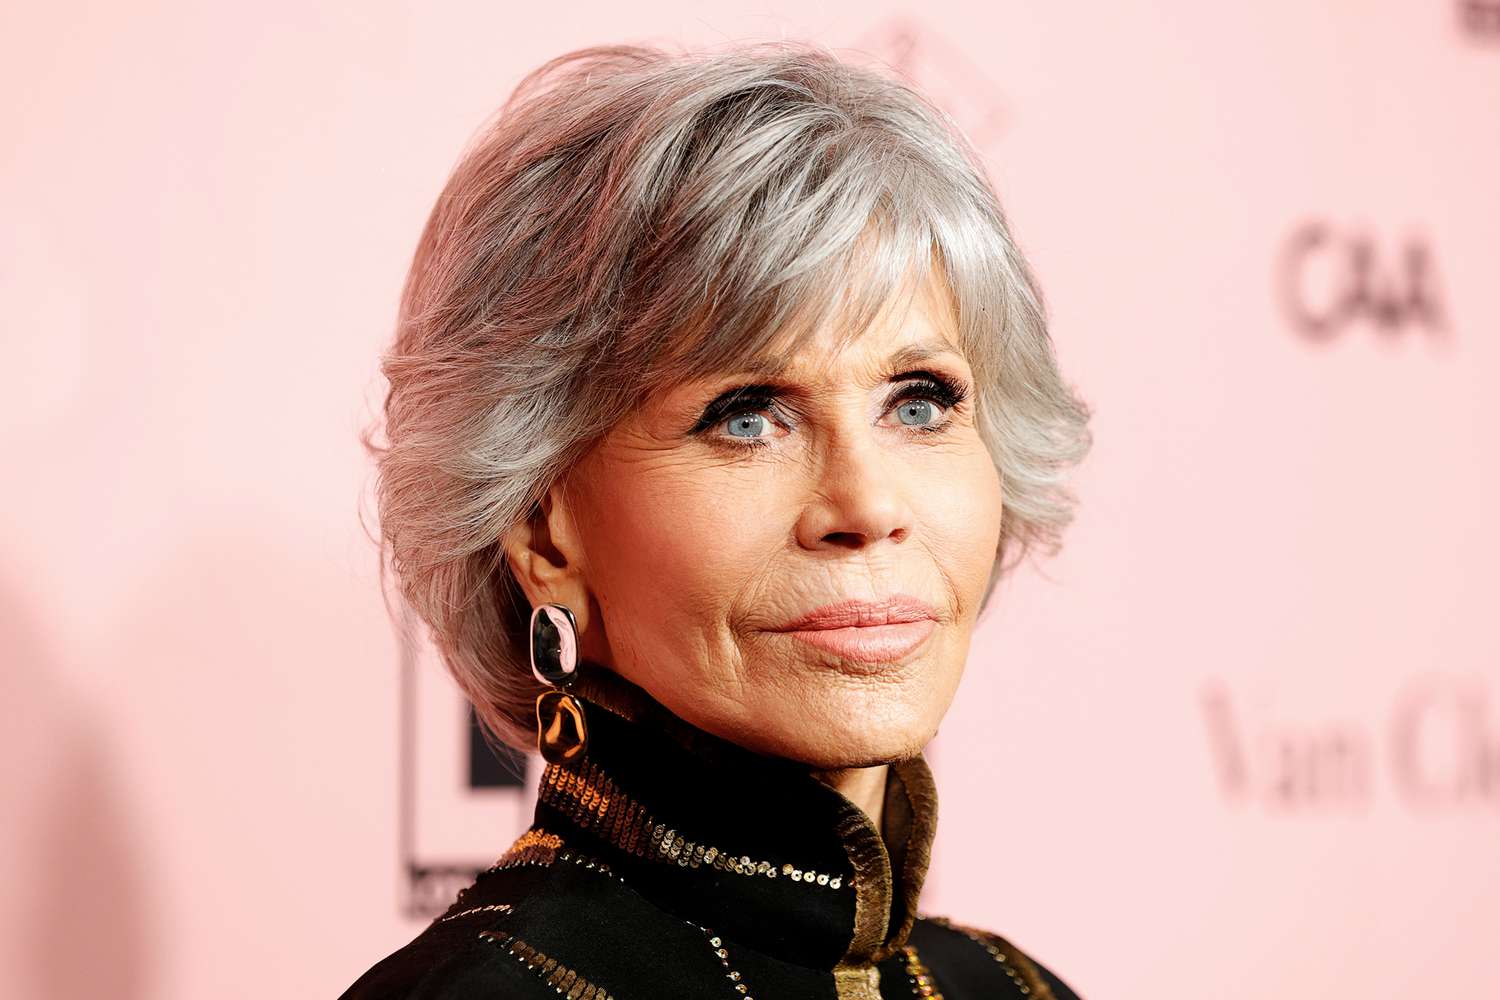 Jane Fonda Reveals the Name of the Director Who Wanted to "Go to Bed" With Her to Preview Her Org*sm